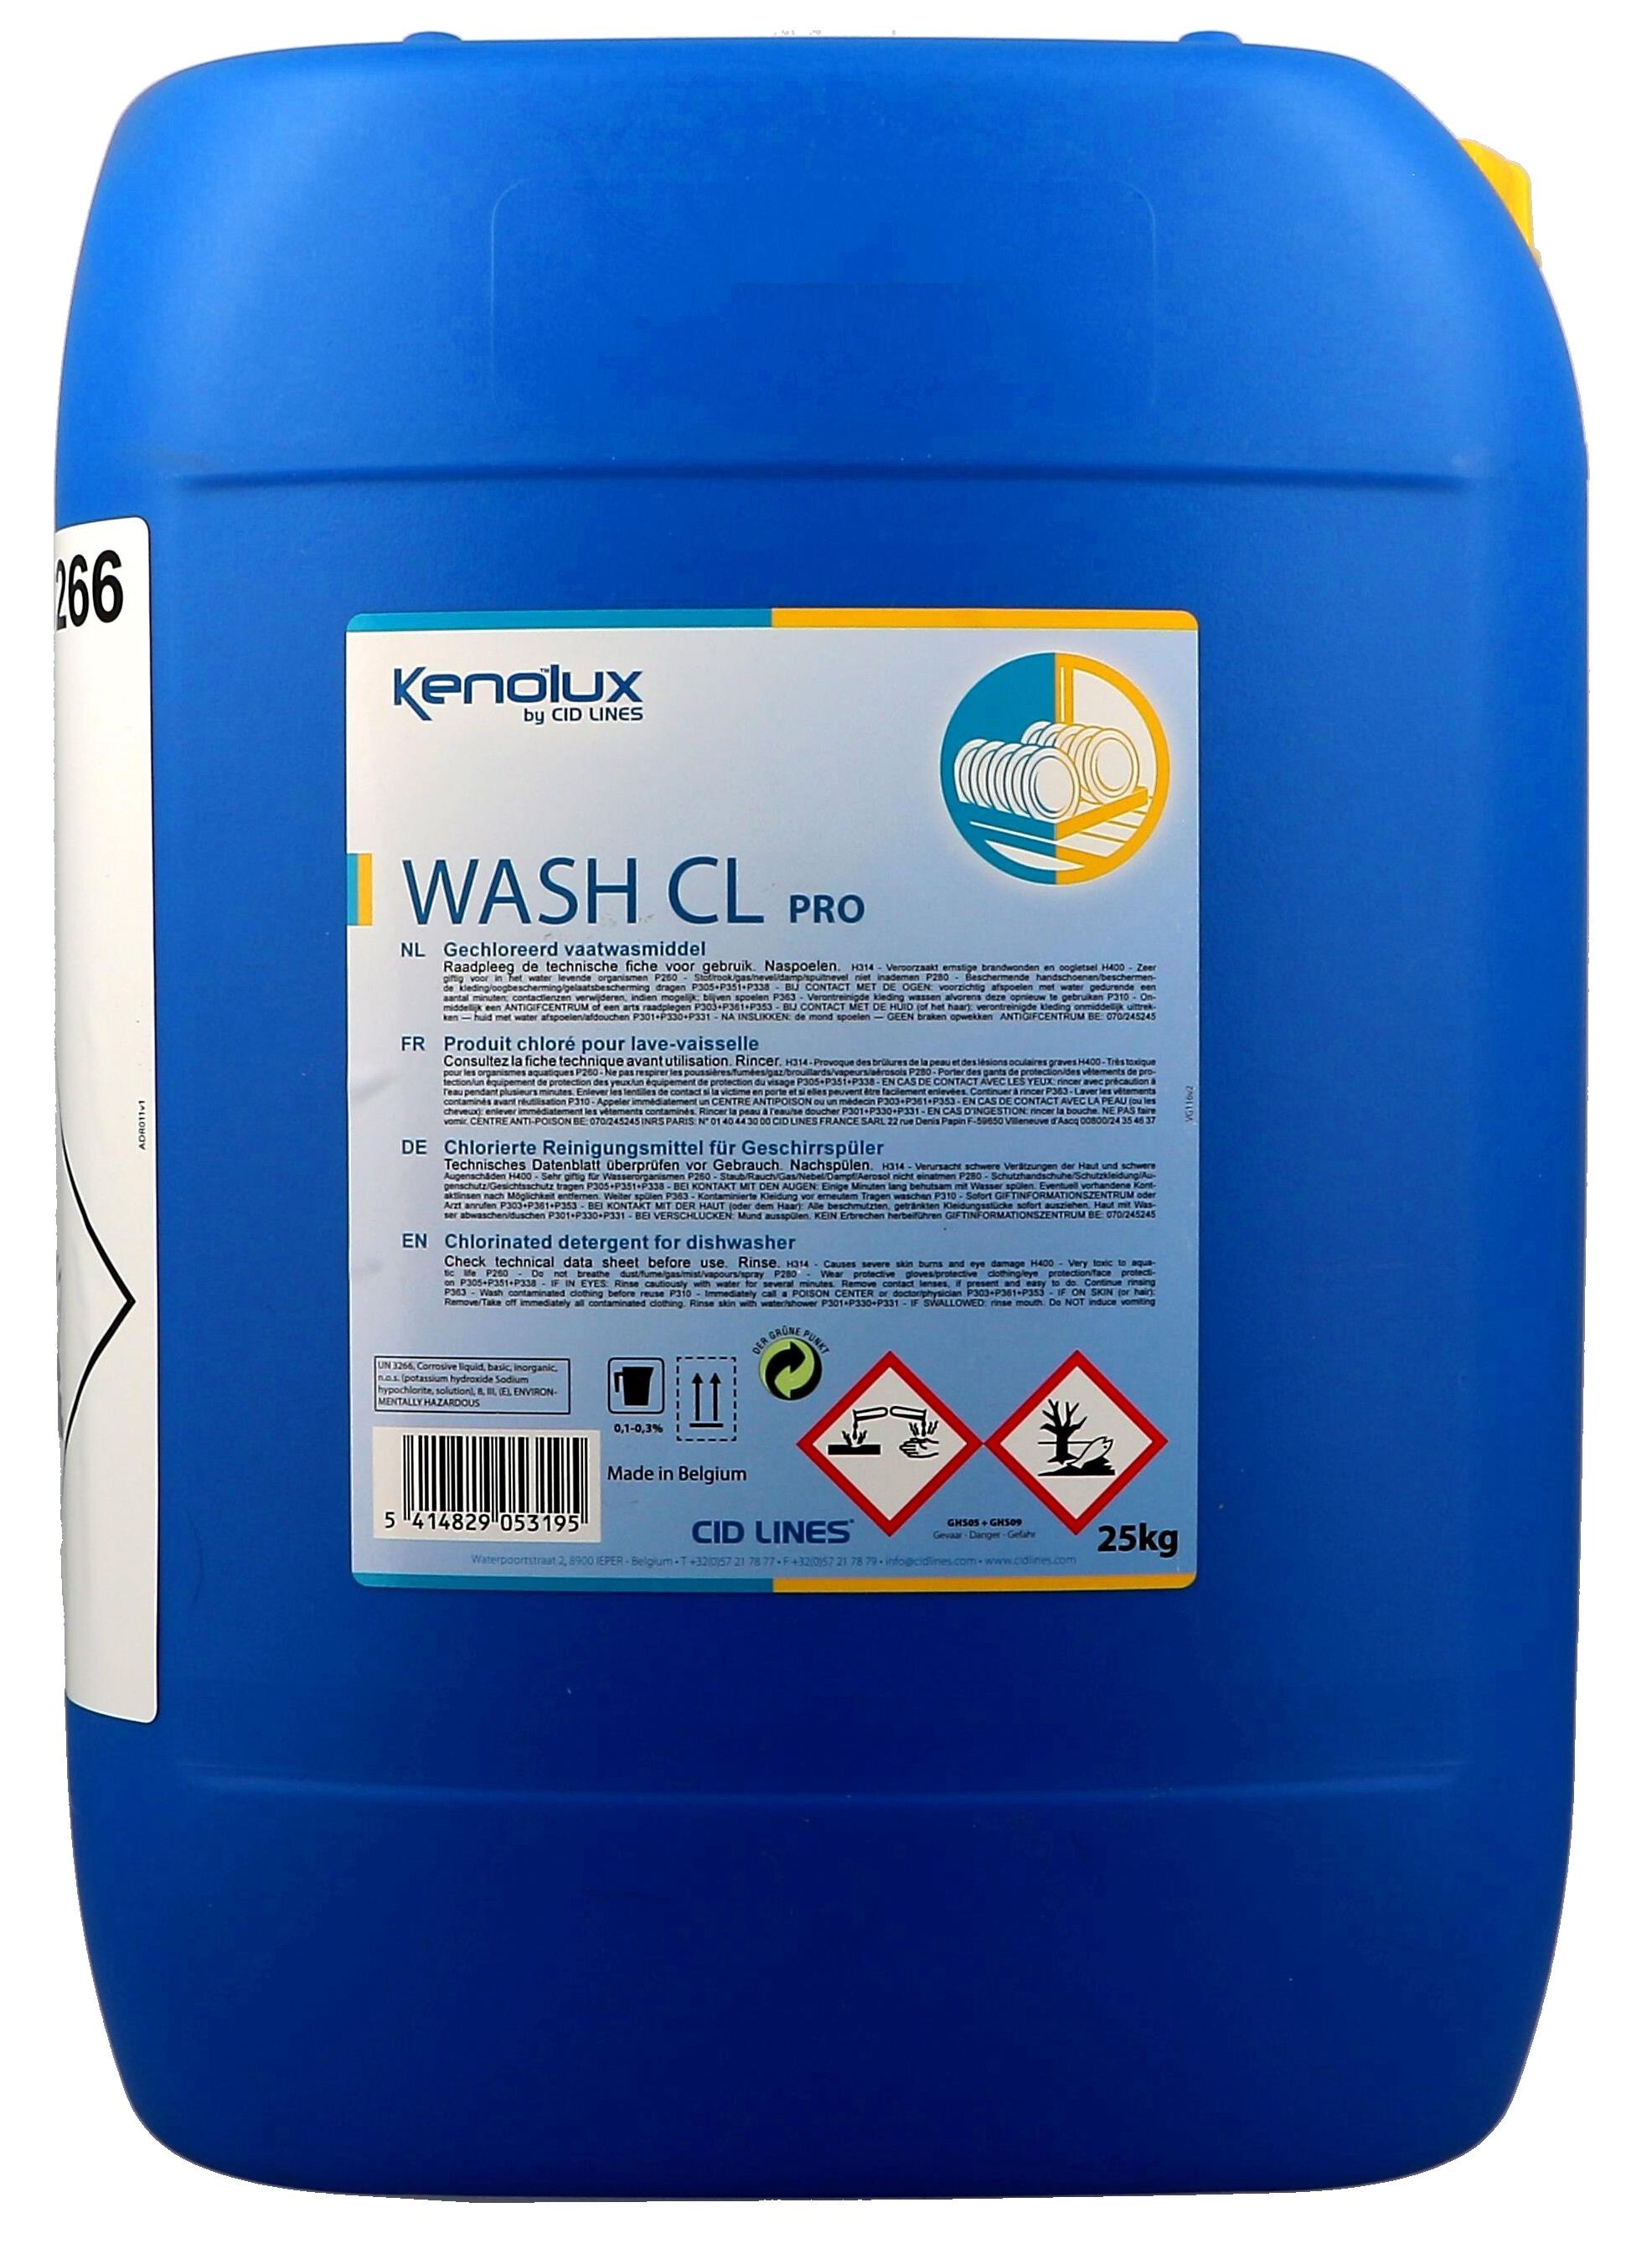 Kenolux Wash CL 25kg Chlorinated cleaning product for automated dish washing Cid Lines (Vaatwasproducten)